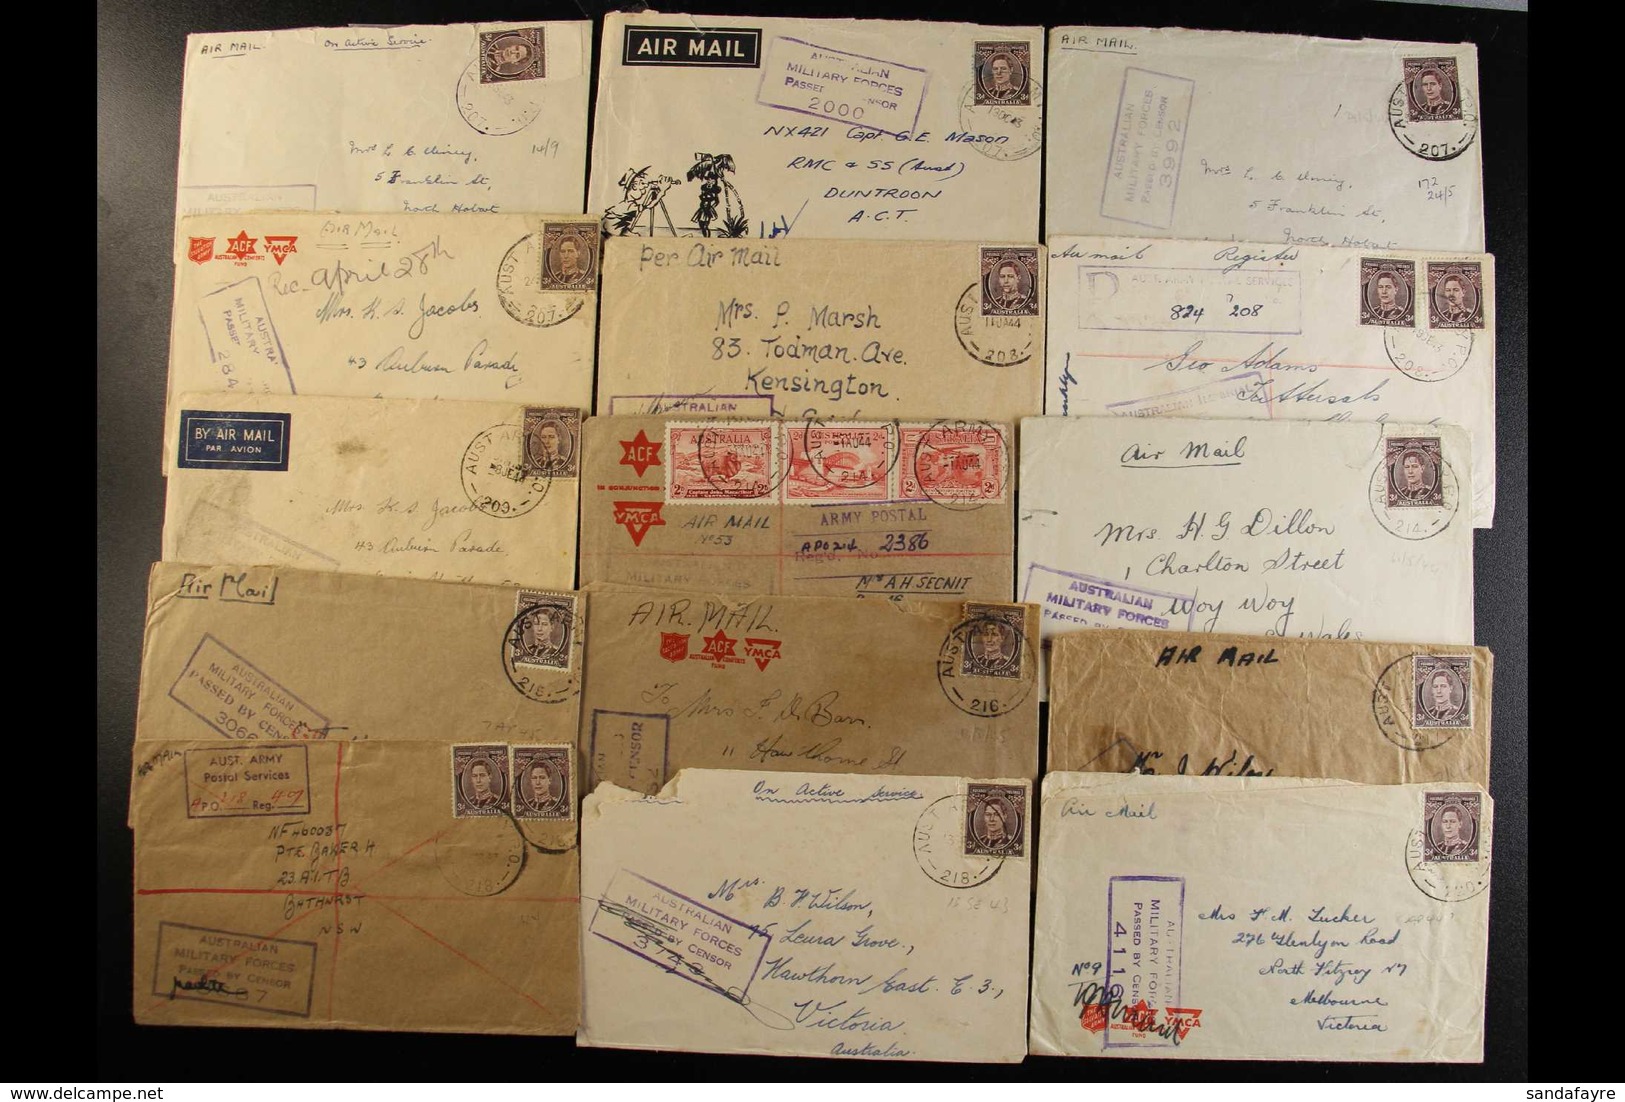 WW2 AUSTRALIAN FORCES - AUST ARMY DATESTAMPS A Fine Collection Of Covers Back To Australia, Bearing Australian KGVI Stam - Papouasie-Nouvelle-Guinée